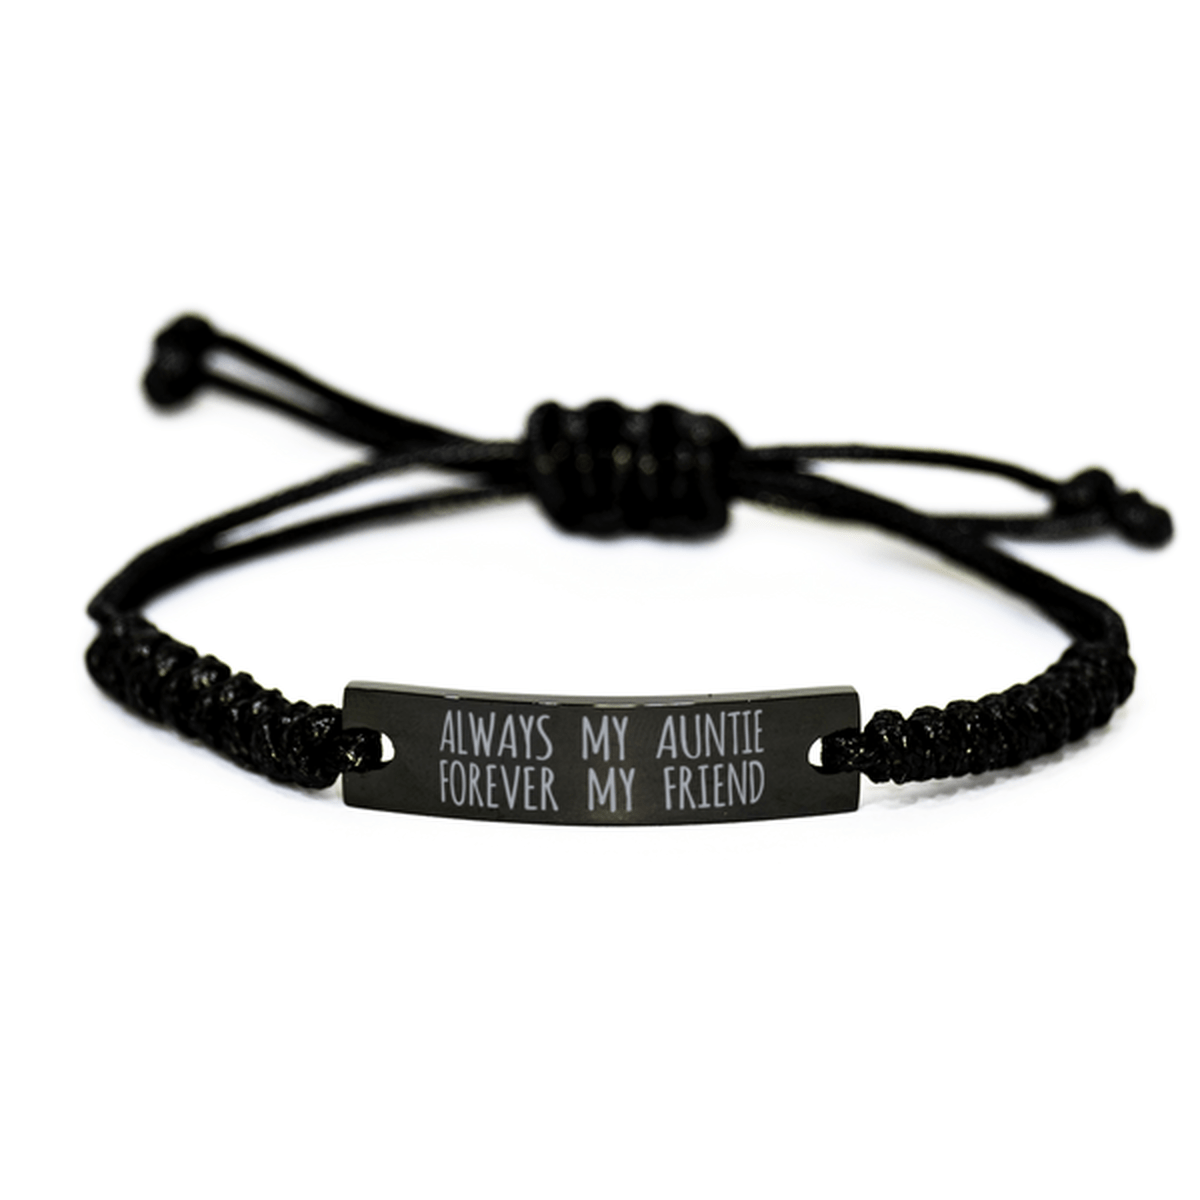 Inspirational Auntie Black Rope Bracelet, Always My Auntie Forever My Friend, Best Birthday Gifts For Family